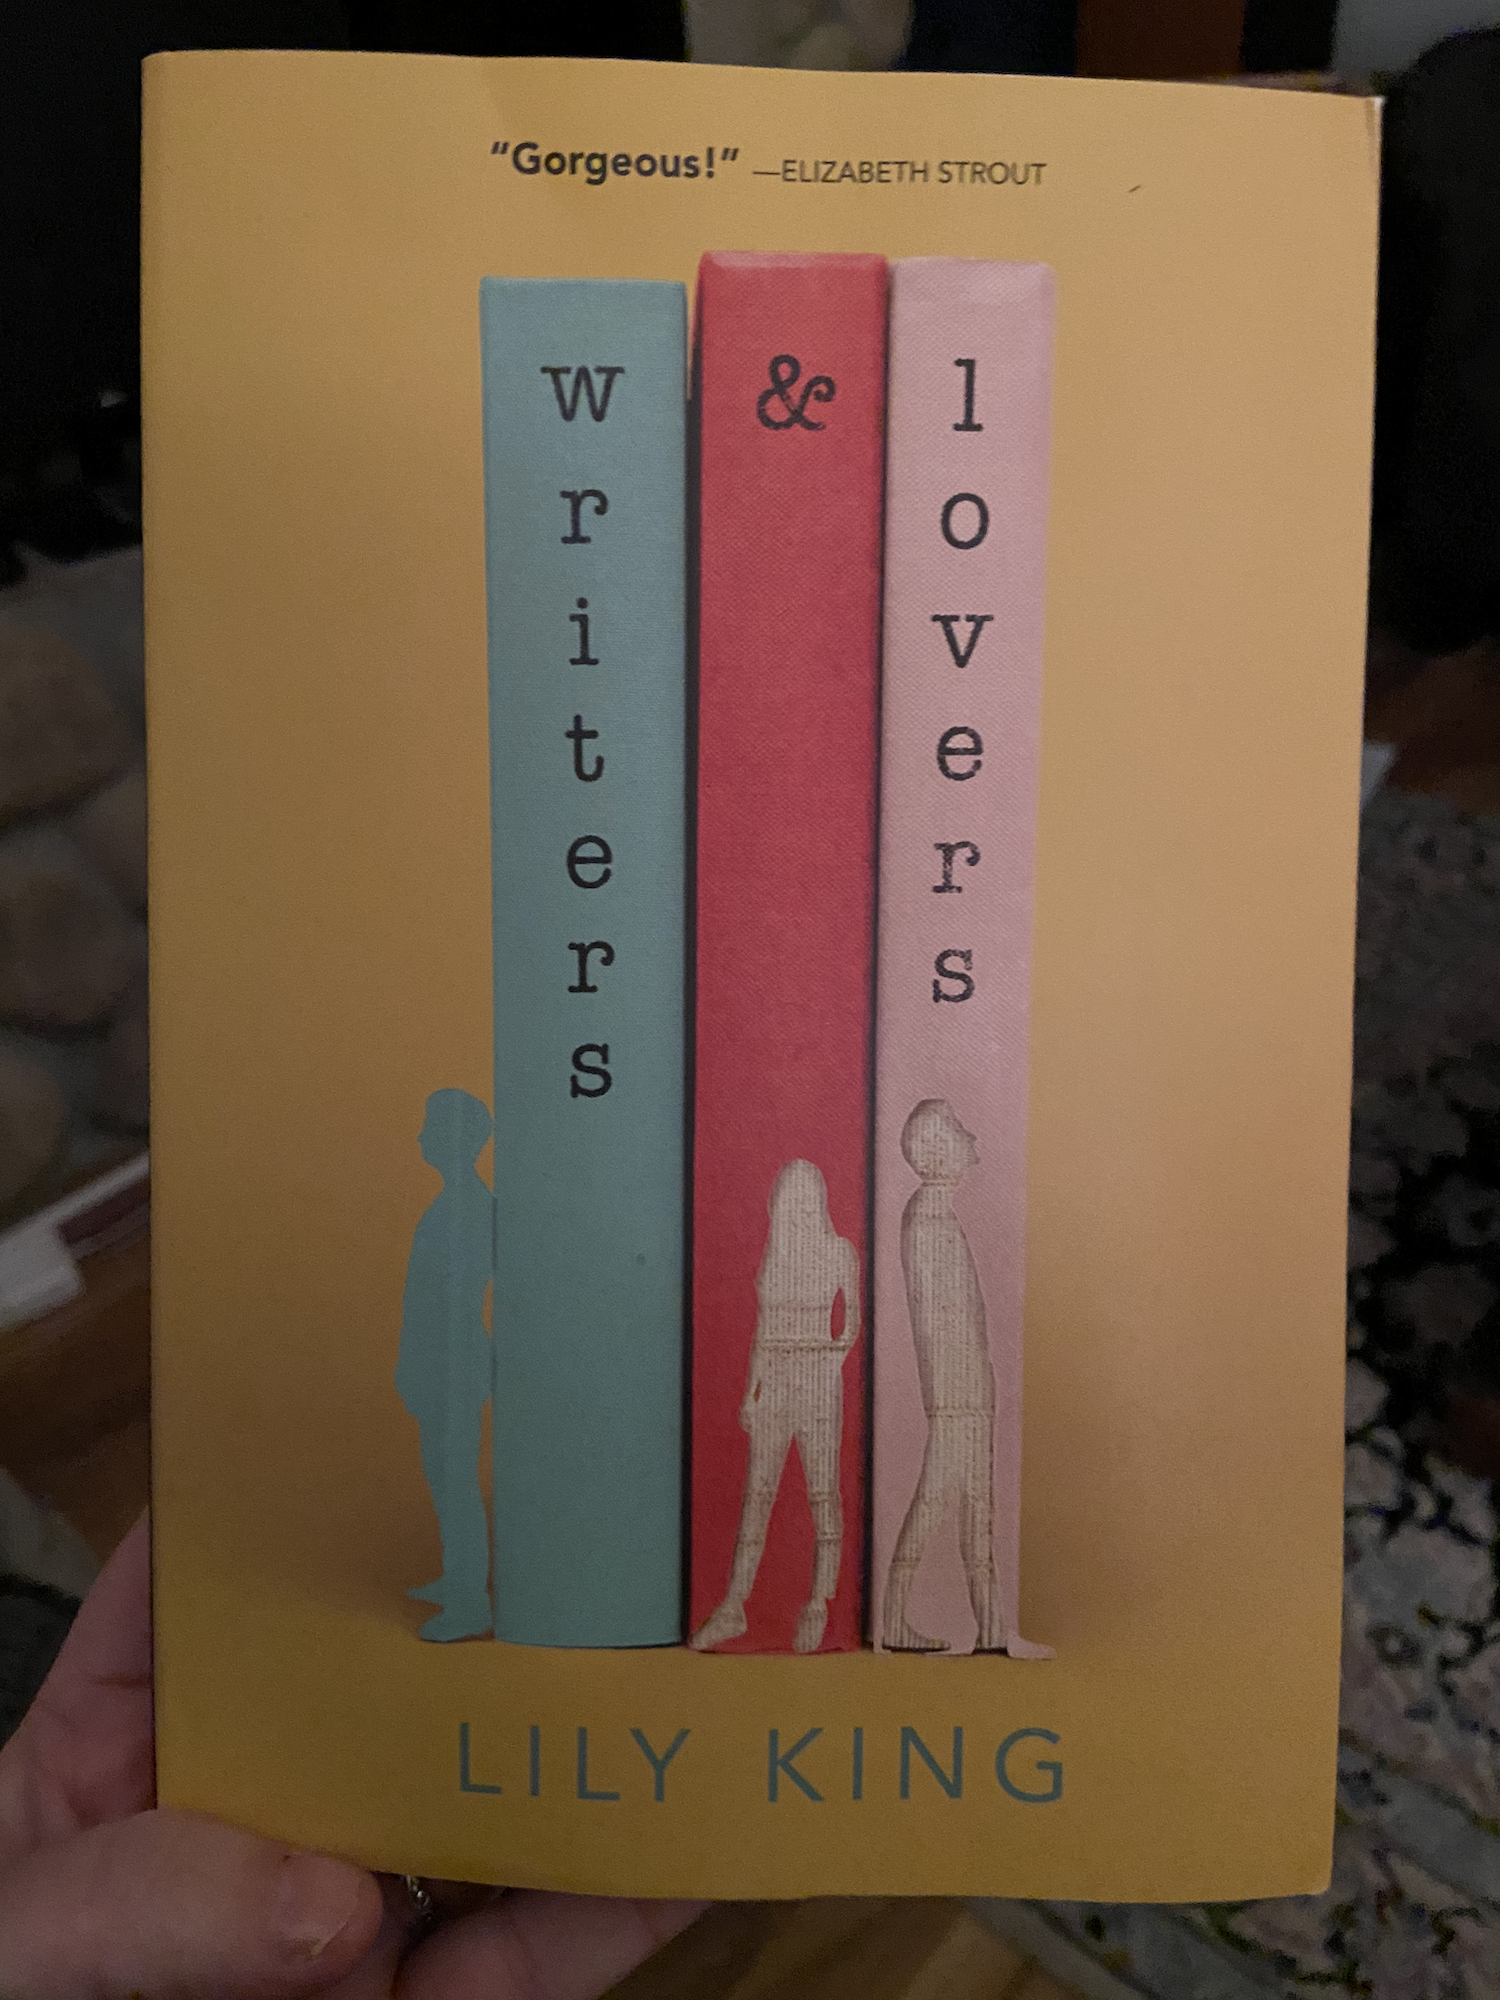 The cover of Writers and Lovers by Lily King